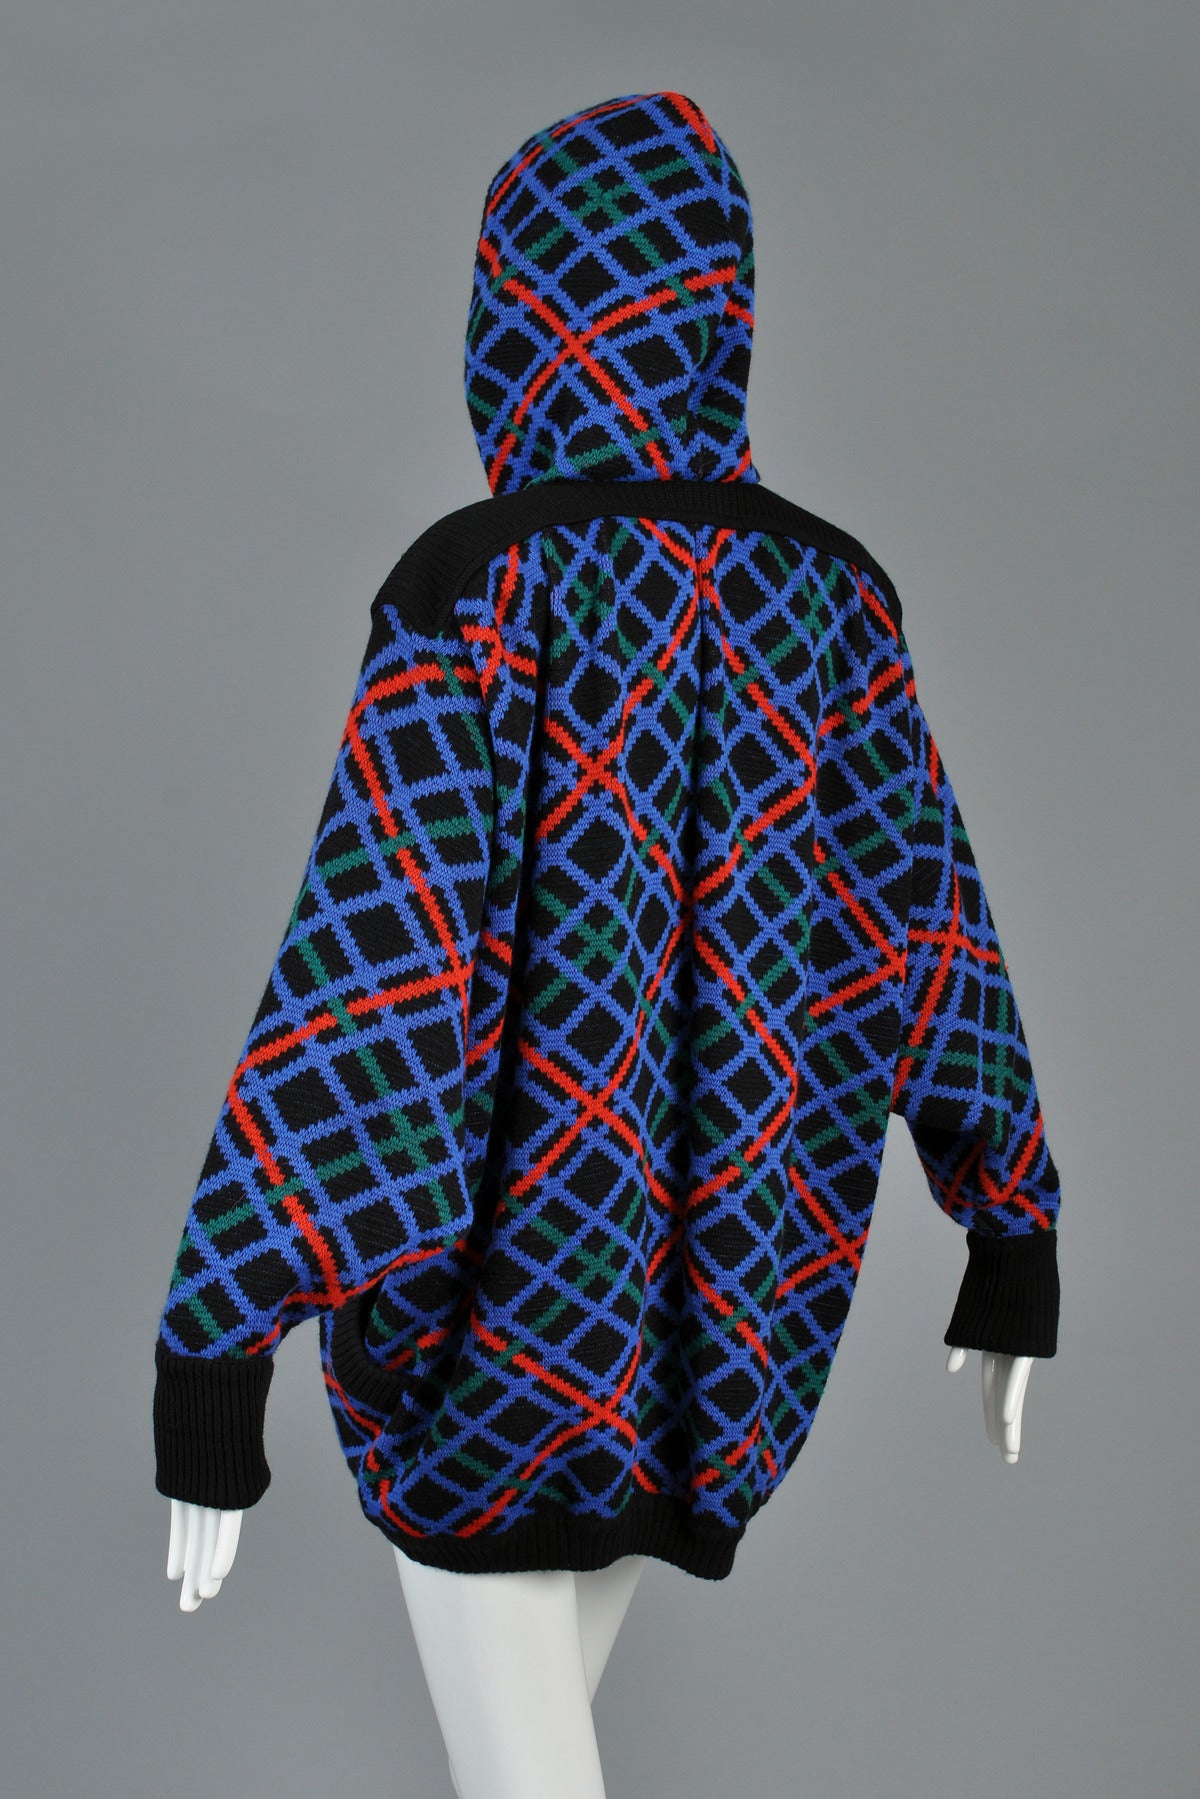 Yves Saint Laurent 1980s Plaid Hooded Knit Cocoon Jacket 5